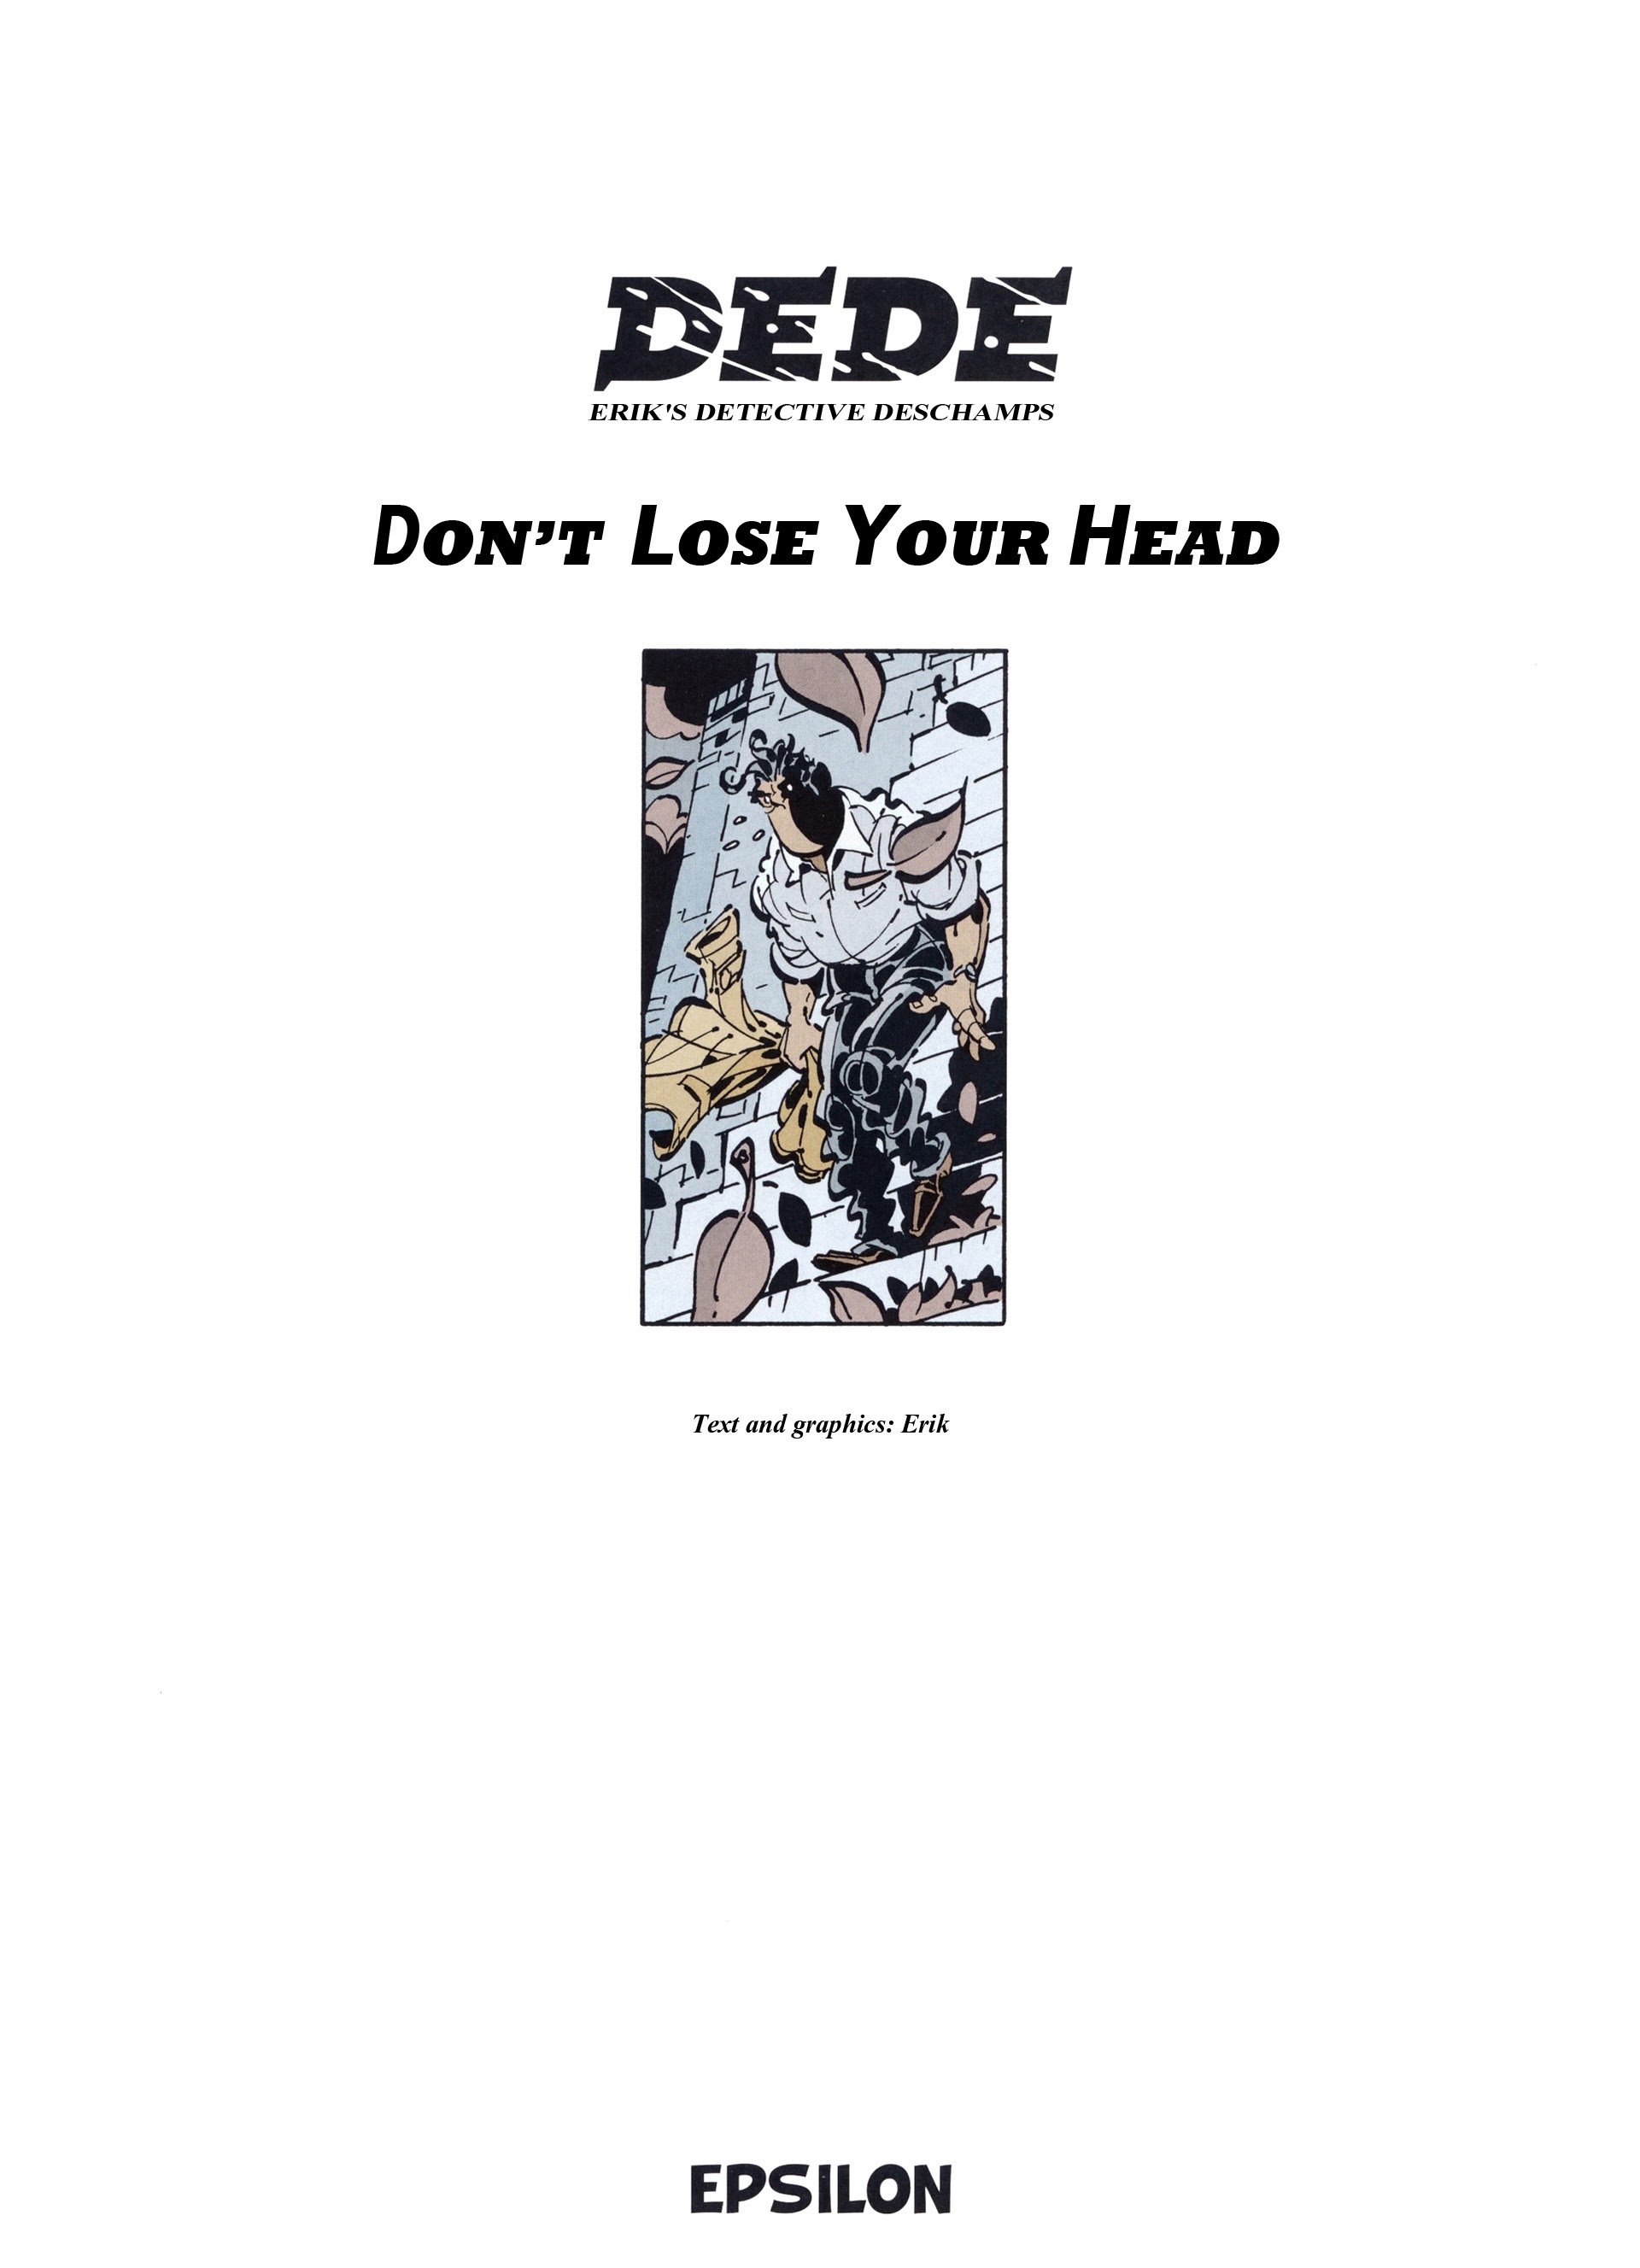 Read online Dede comic -  Issue #2 - 3